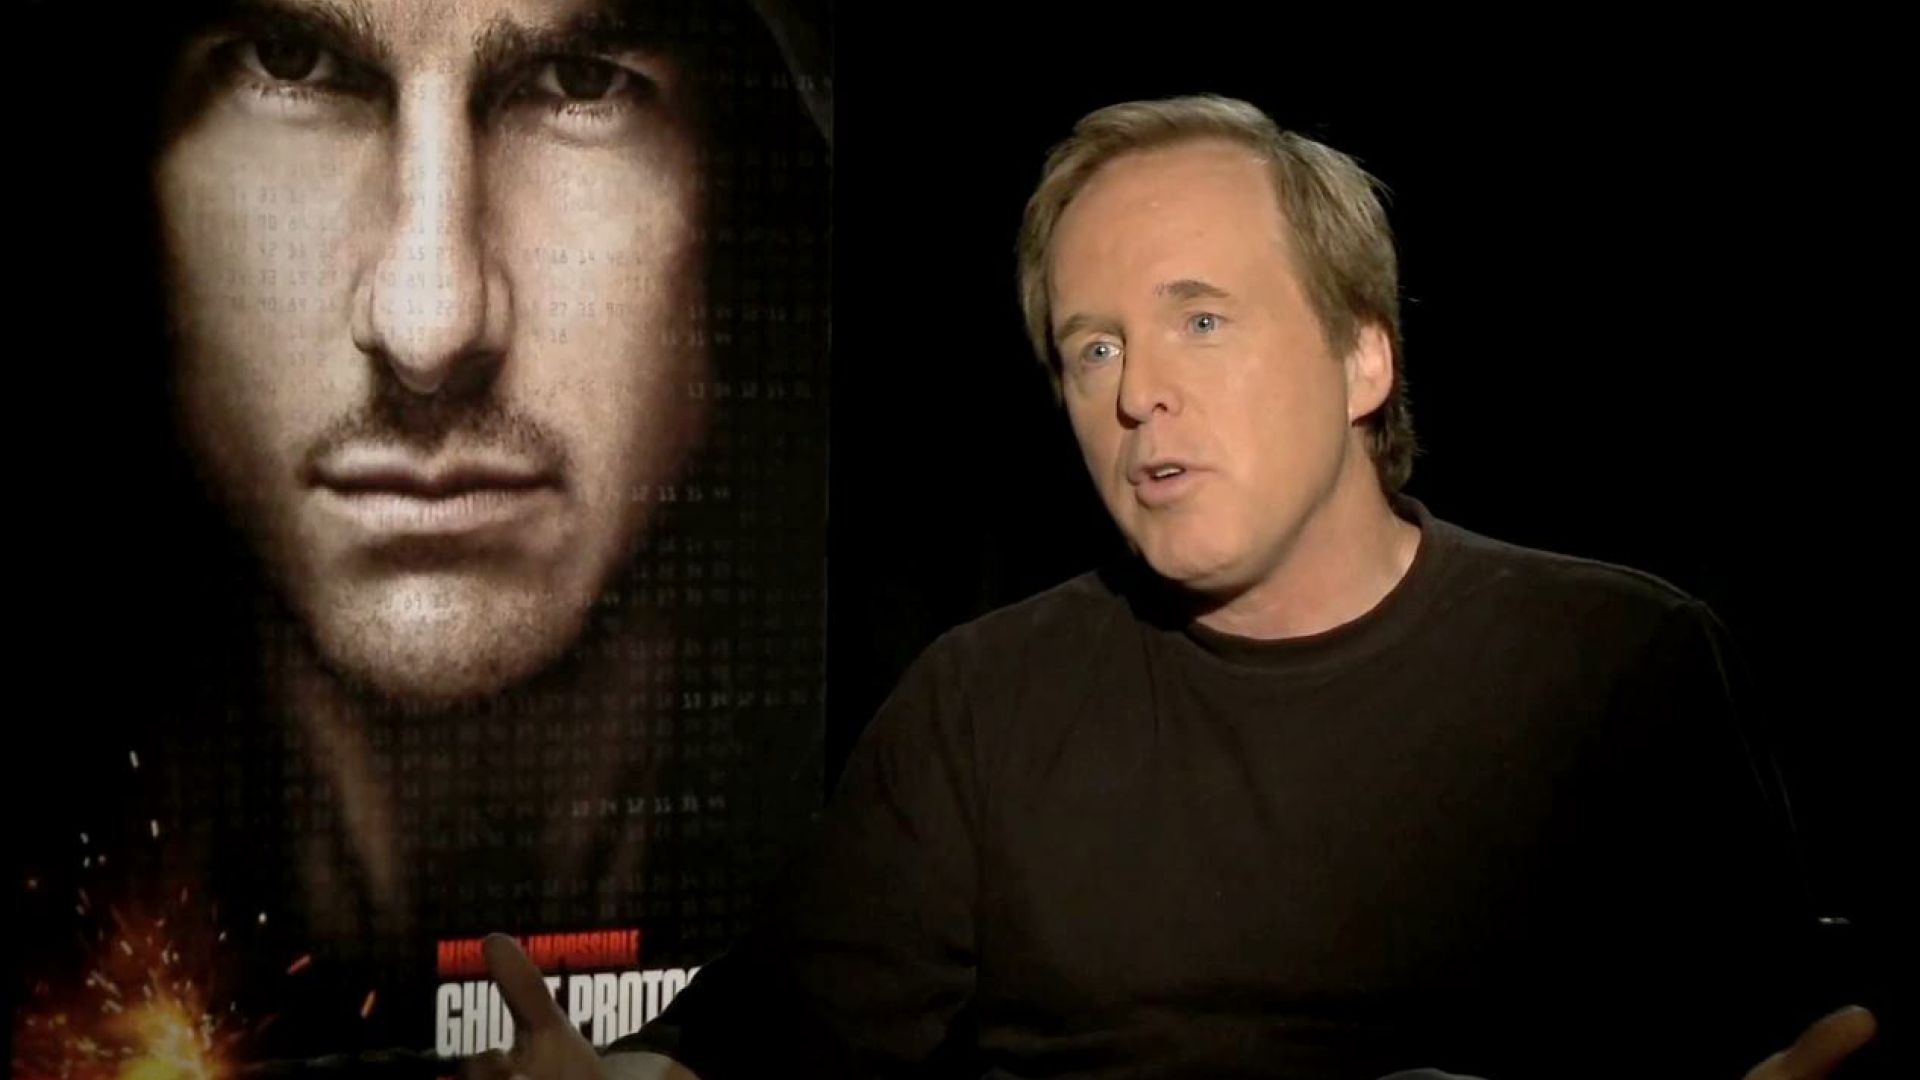 Director Brad Bird talks about shooting 25 minutes of Mission: Impossible - Ghost Protocol in IMAX